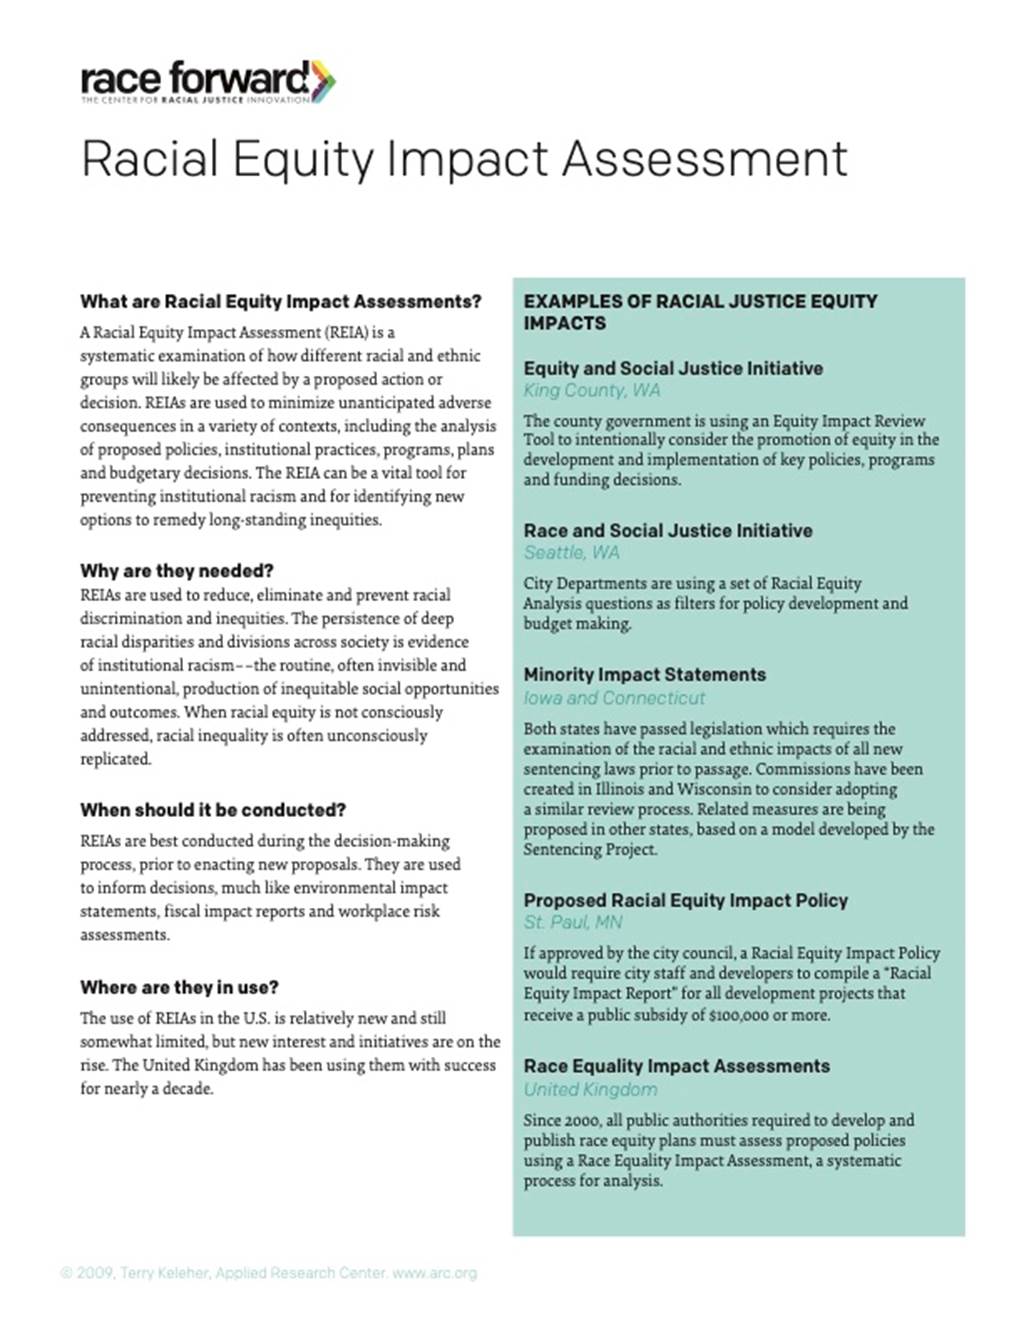 Race Equity Impact Assessment - Thumbnail Image